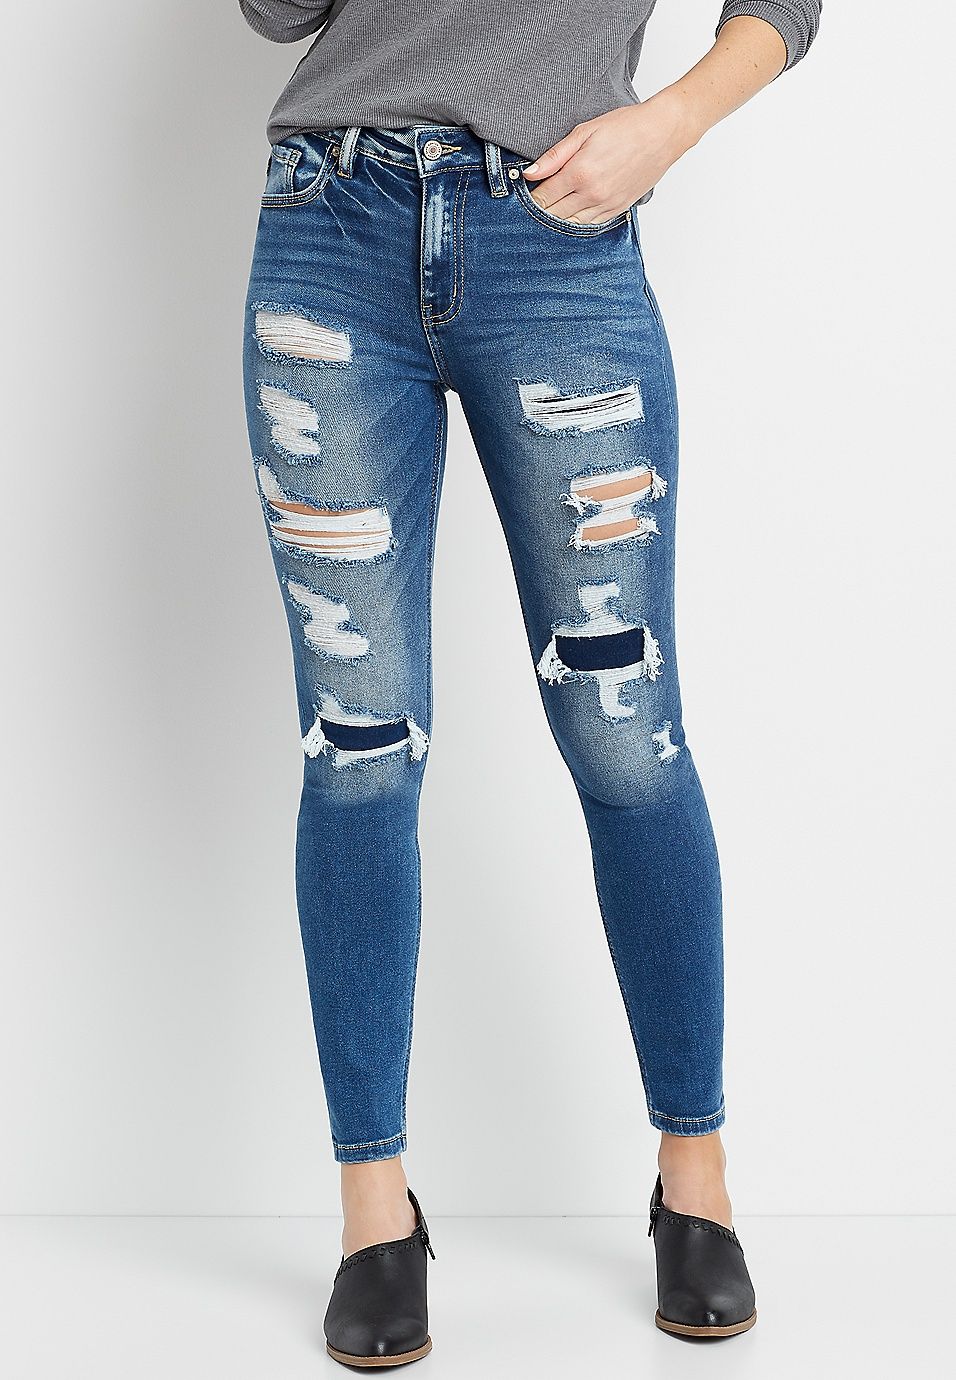 KanCan™ High Rise Medium Backed Destructed Skinny Jean | Maurices